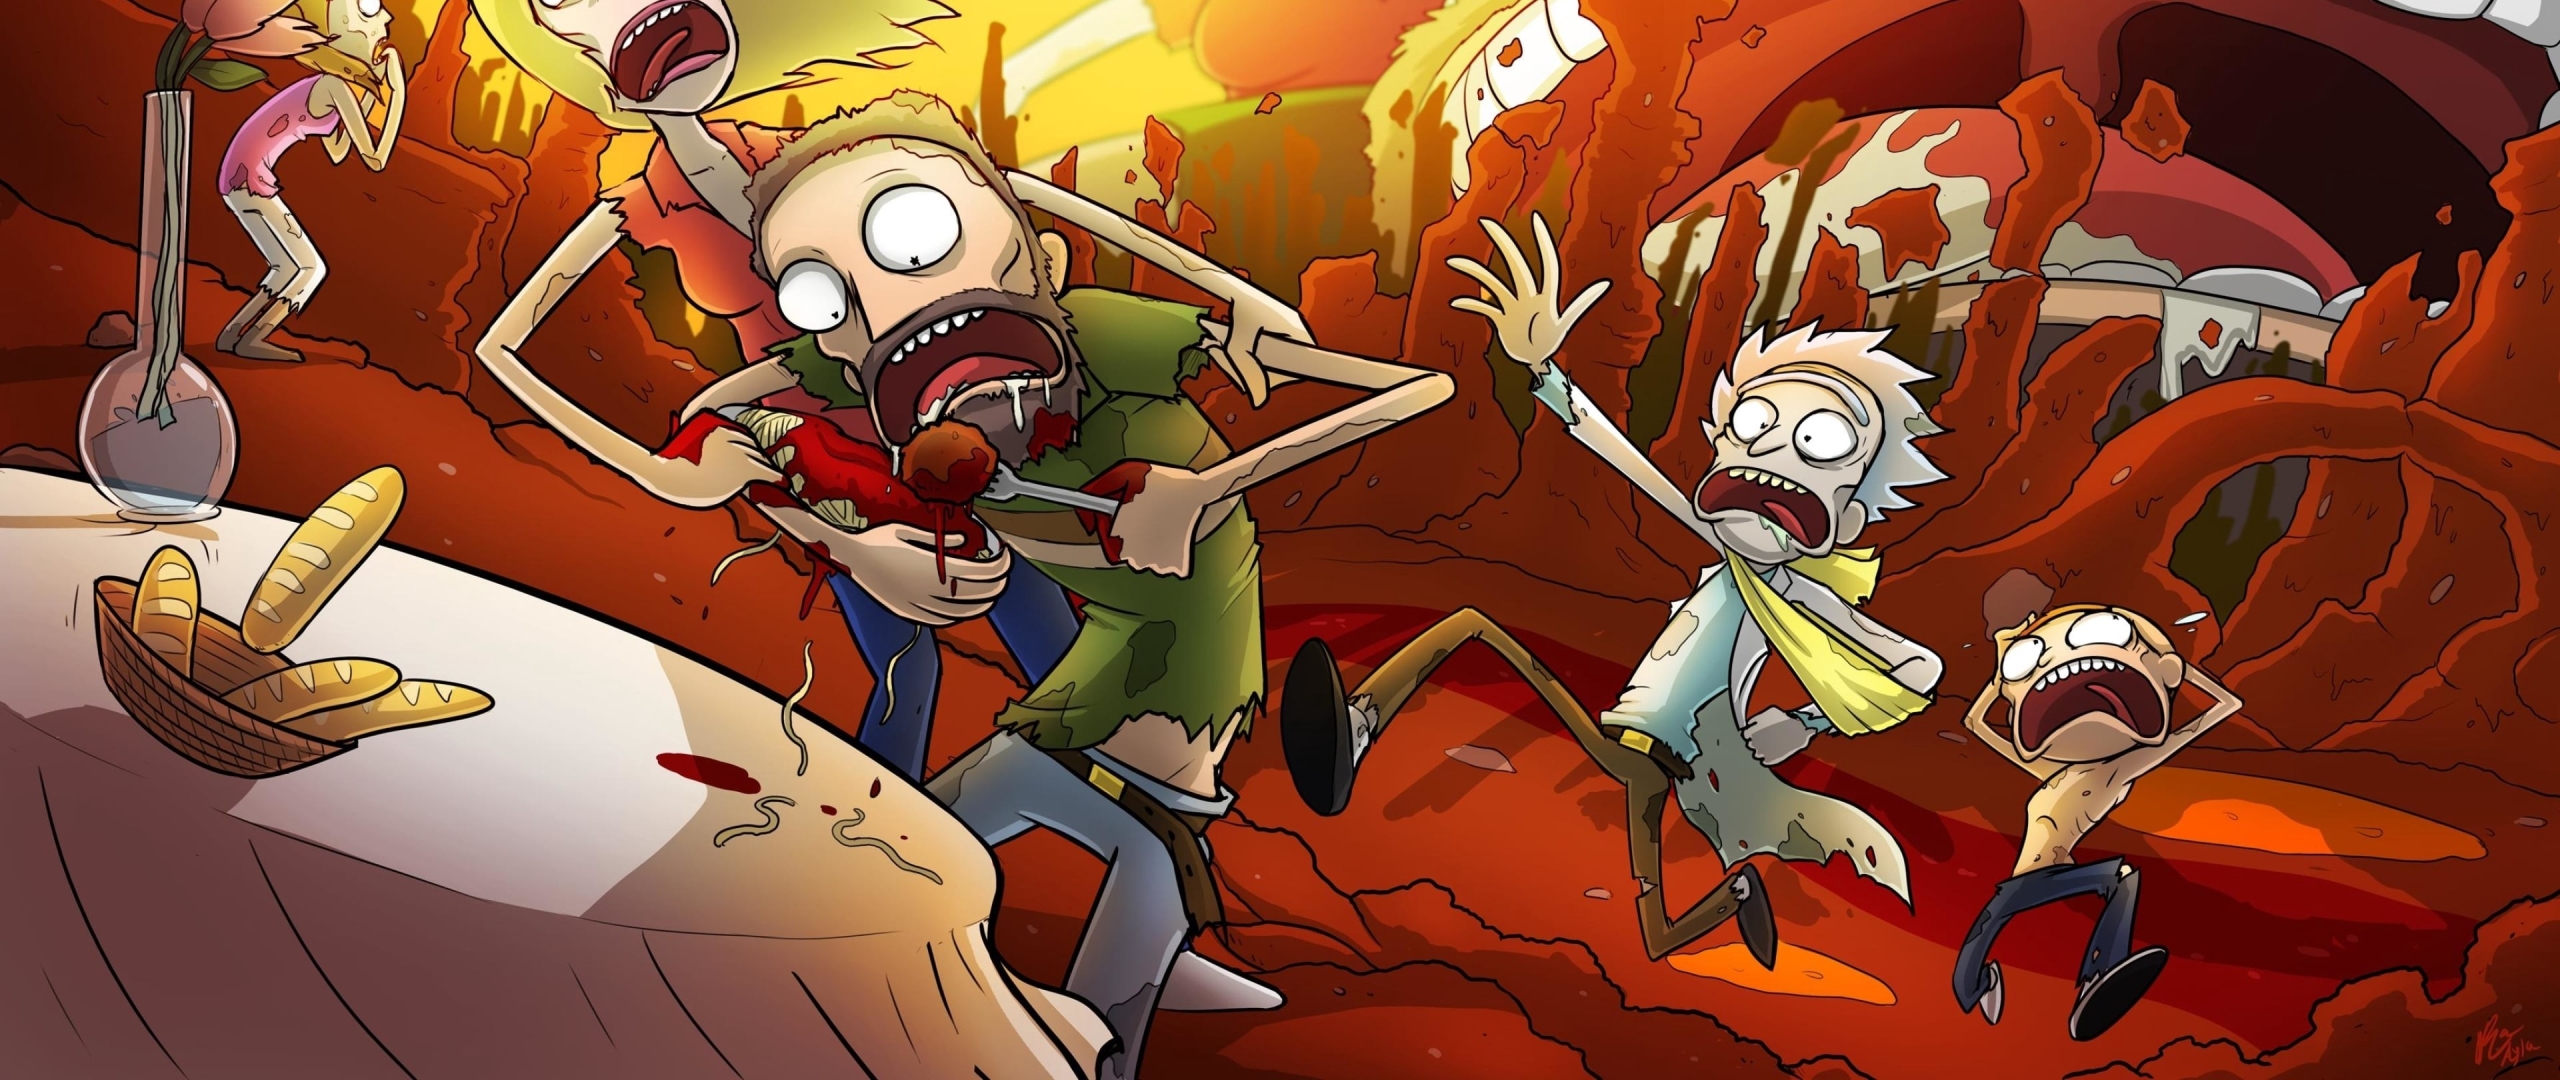 New Rick And Morty 2020 (2560x1080) Resolution Wallpaper.